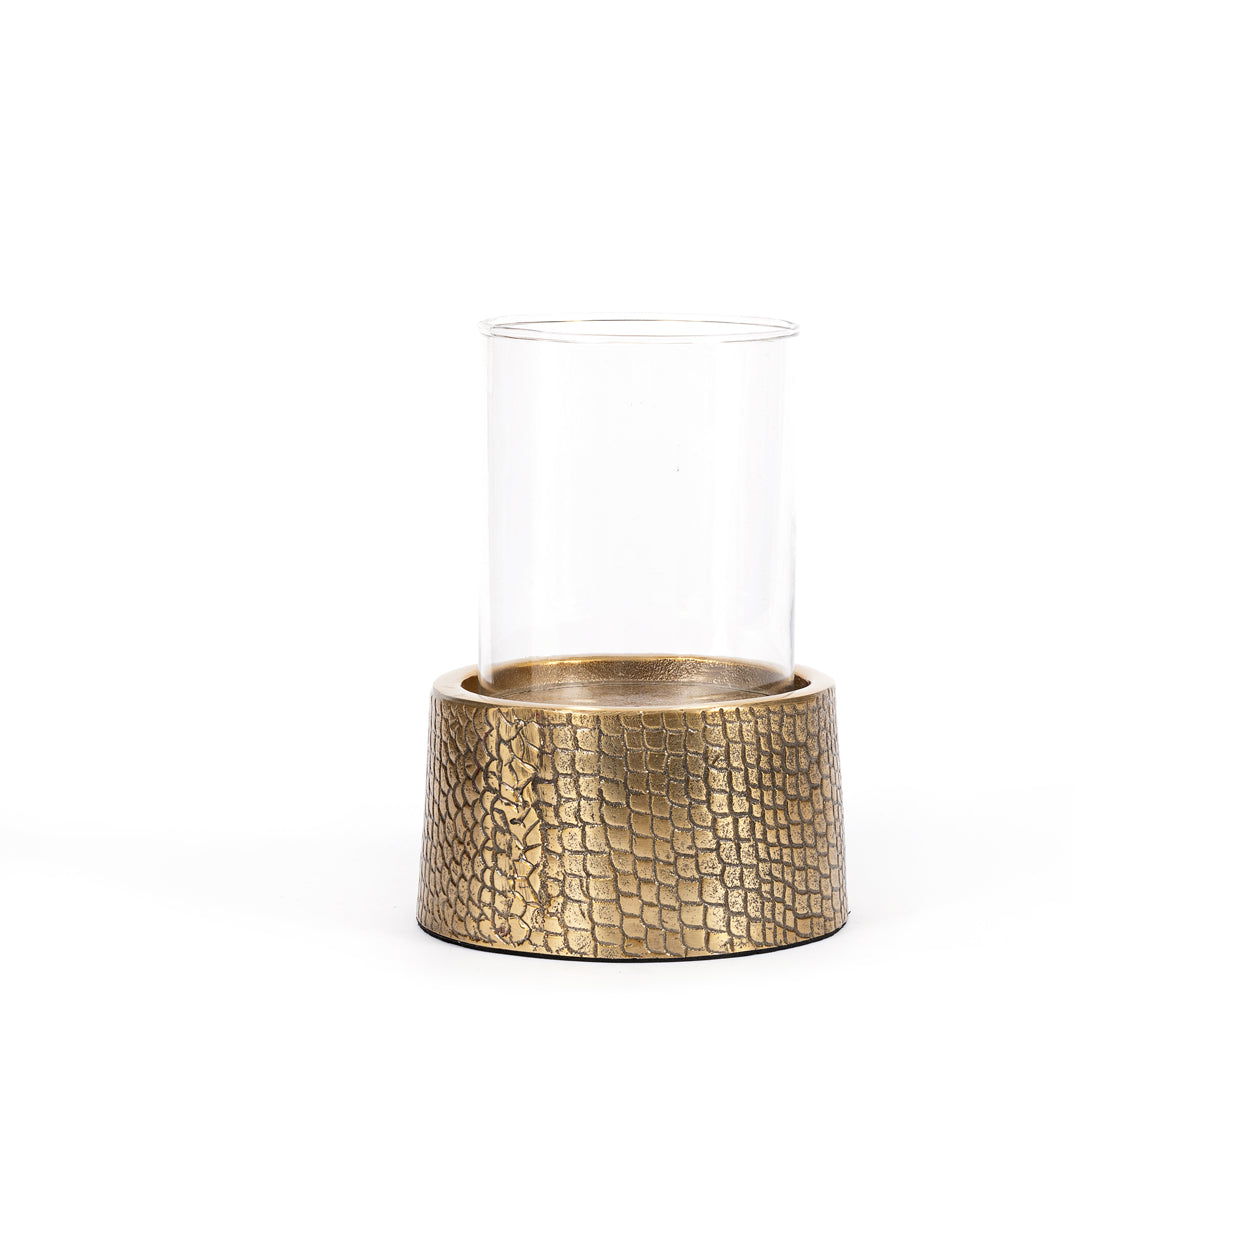 THE CROCO Candle Holder with Glass one medium